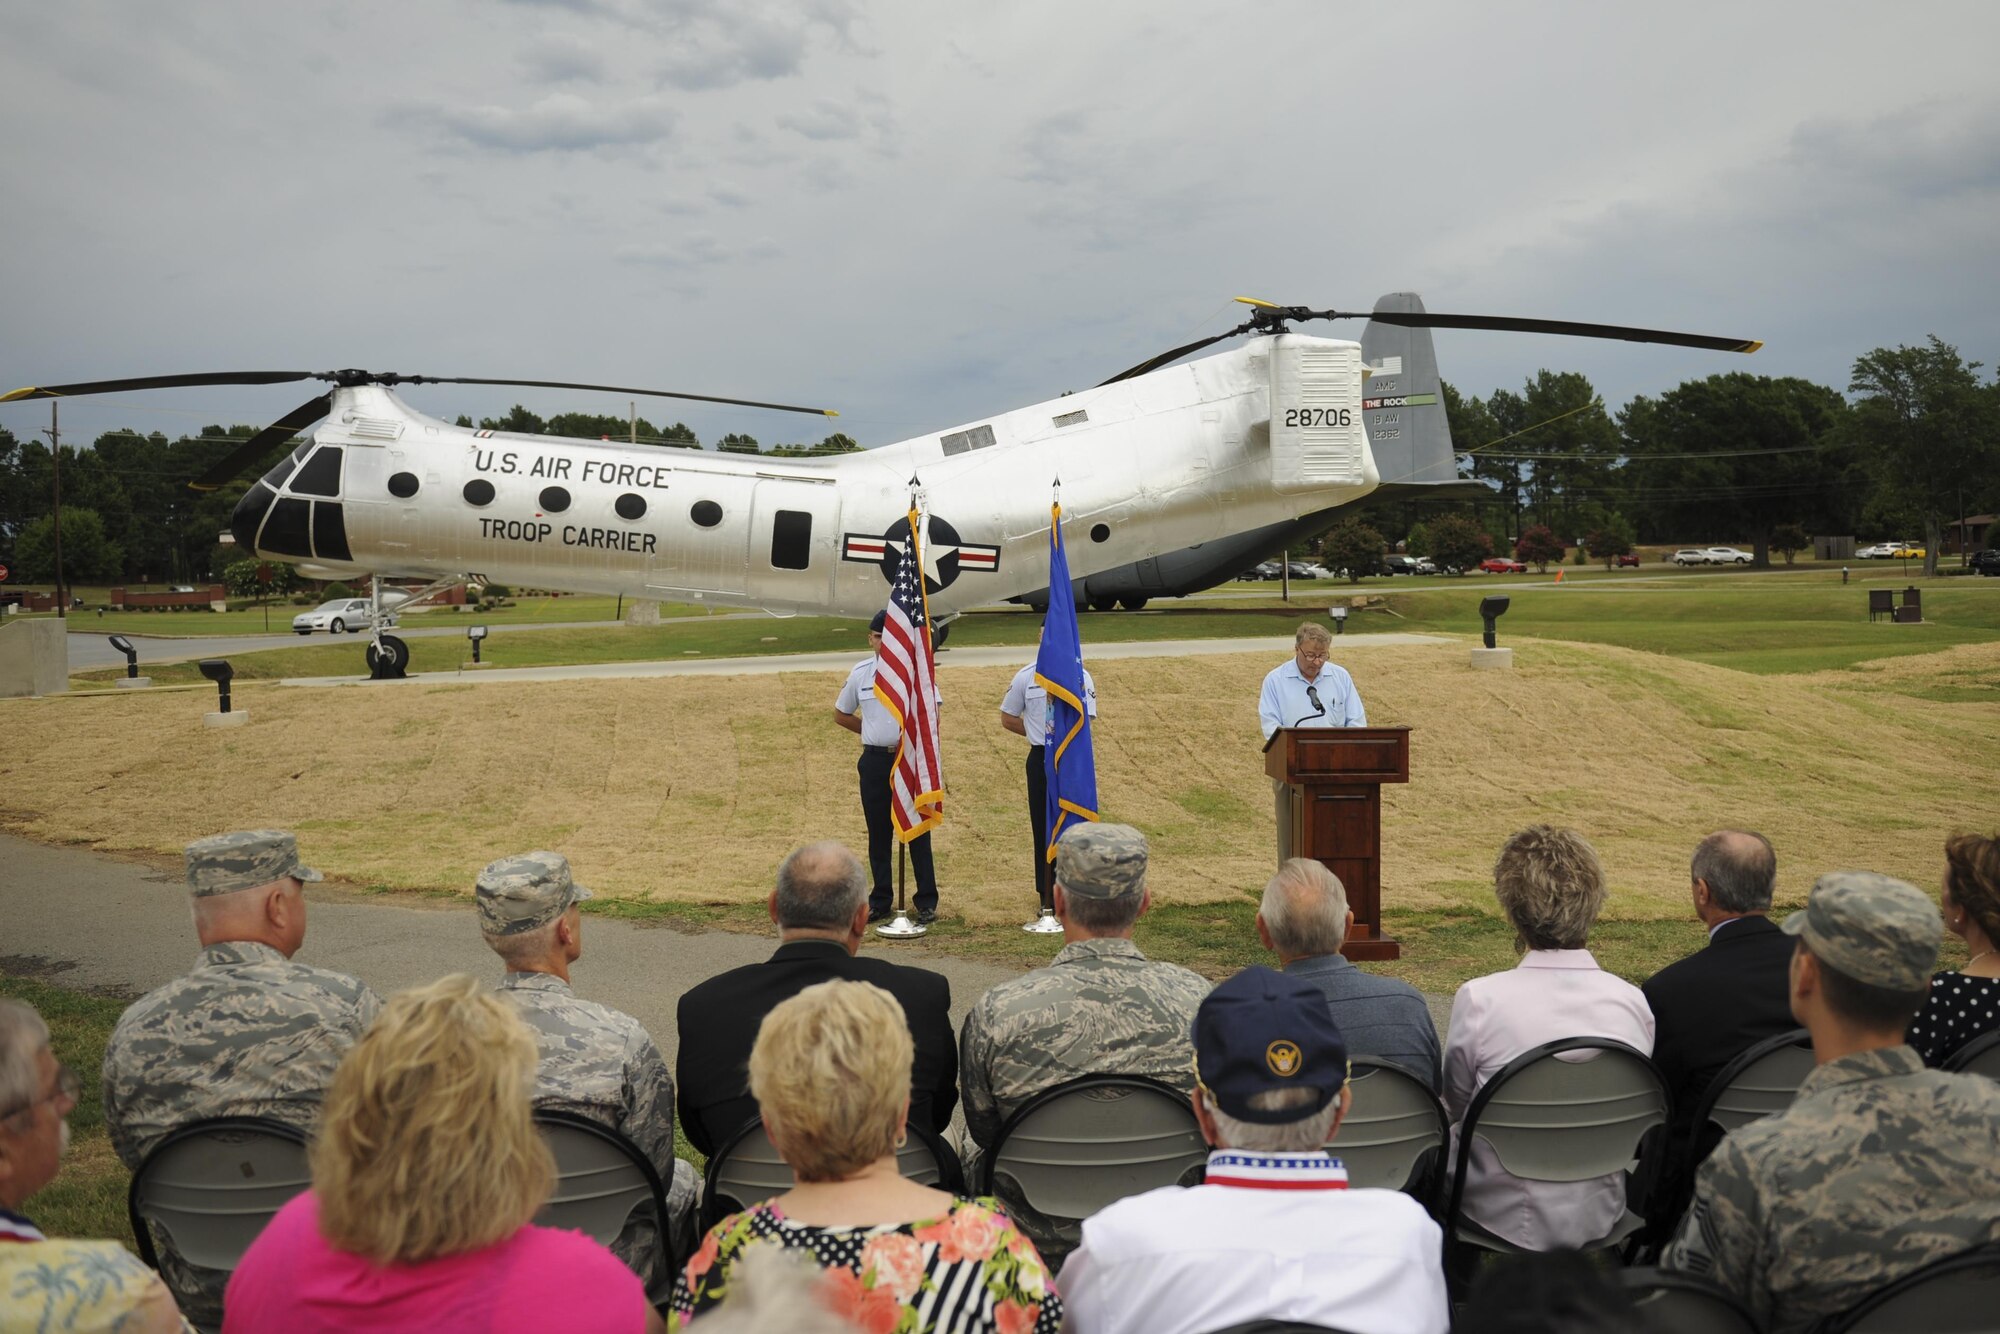 Mark Wilderman, 314th Airlift Wing historian, explains the heritage of the H-21B to a group of Airmen and civic leaders July 14, 2016, at Little Rock Air Force Base, Ark. The H-21B is the newest static display aircraft to enter into the Little Rock AFB fleet at Heritage Park. (U.S. Air Force photo/Senior Airman Harry Brexel)